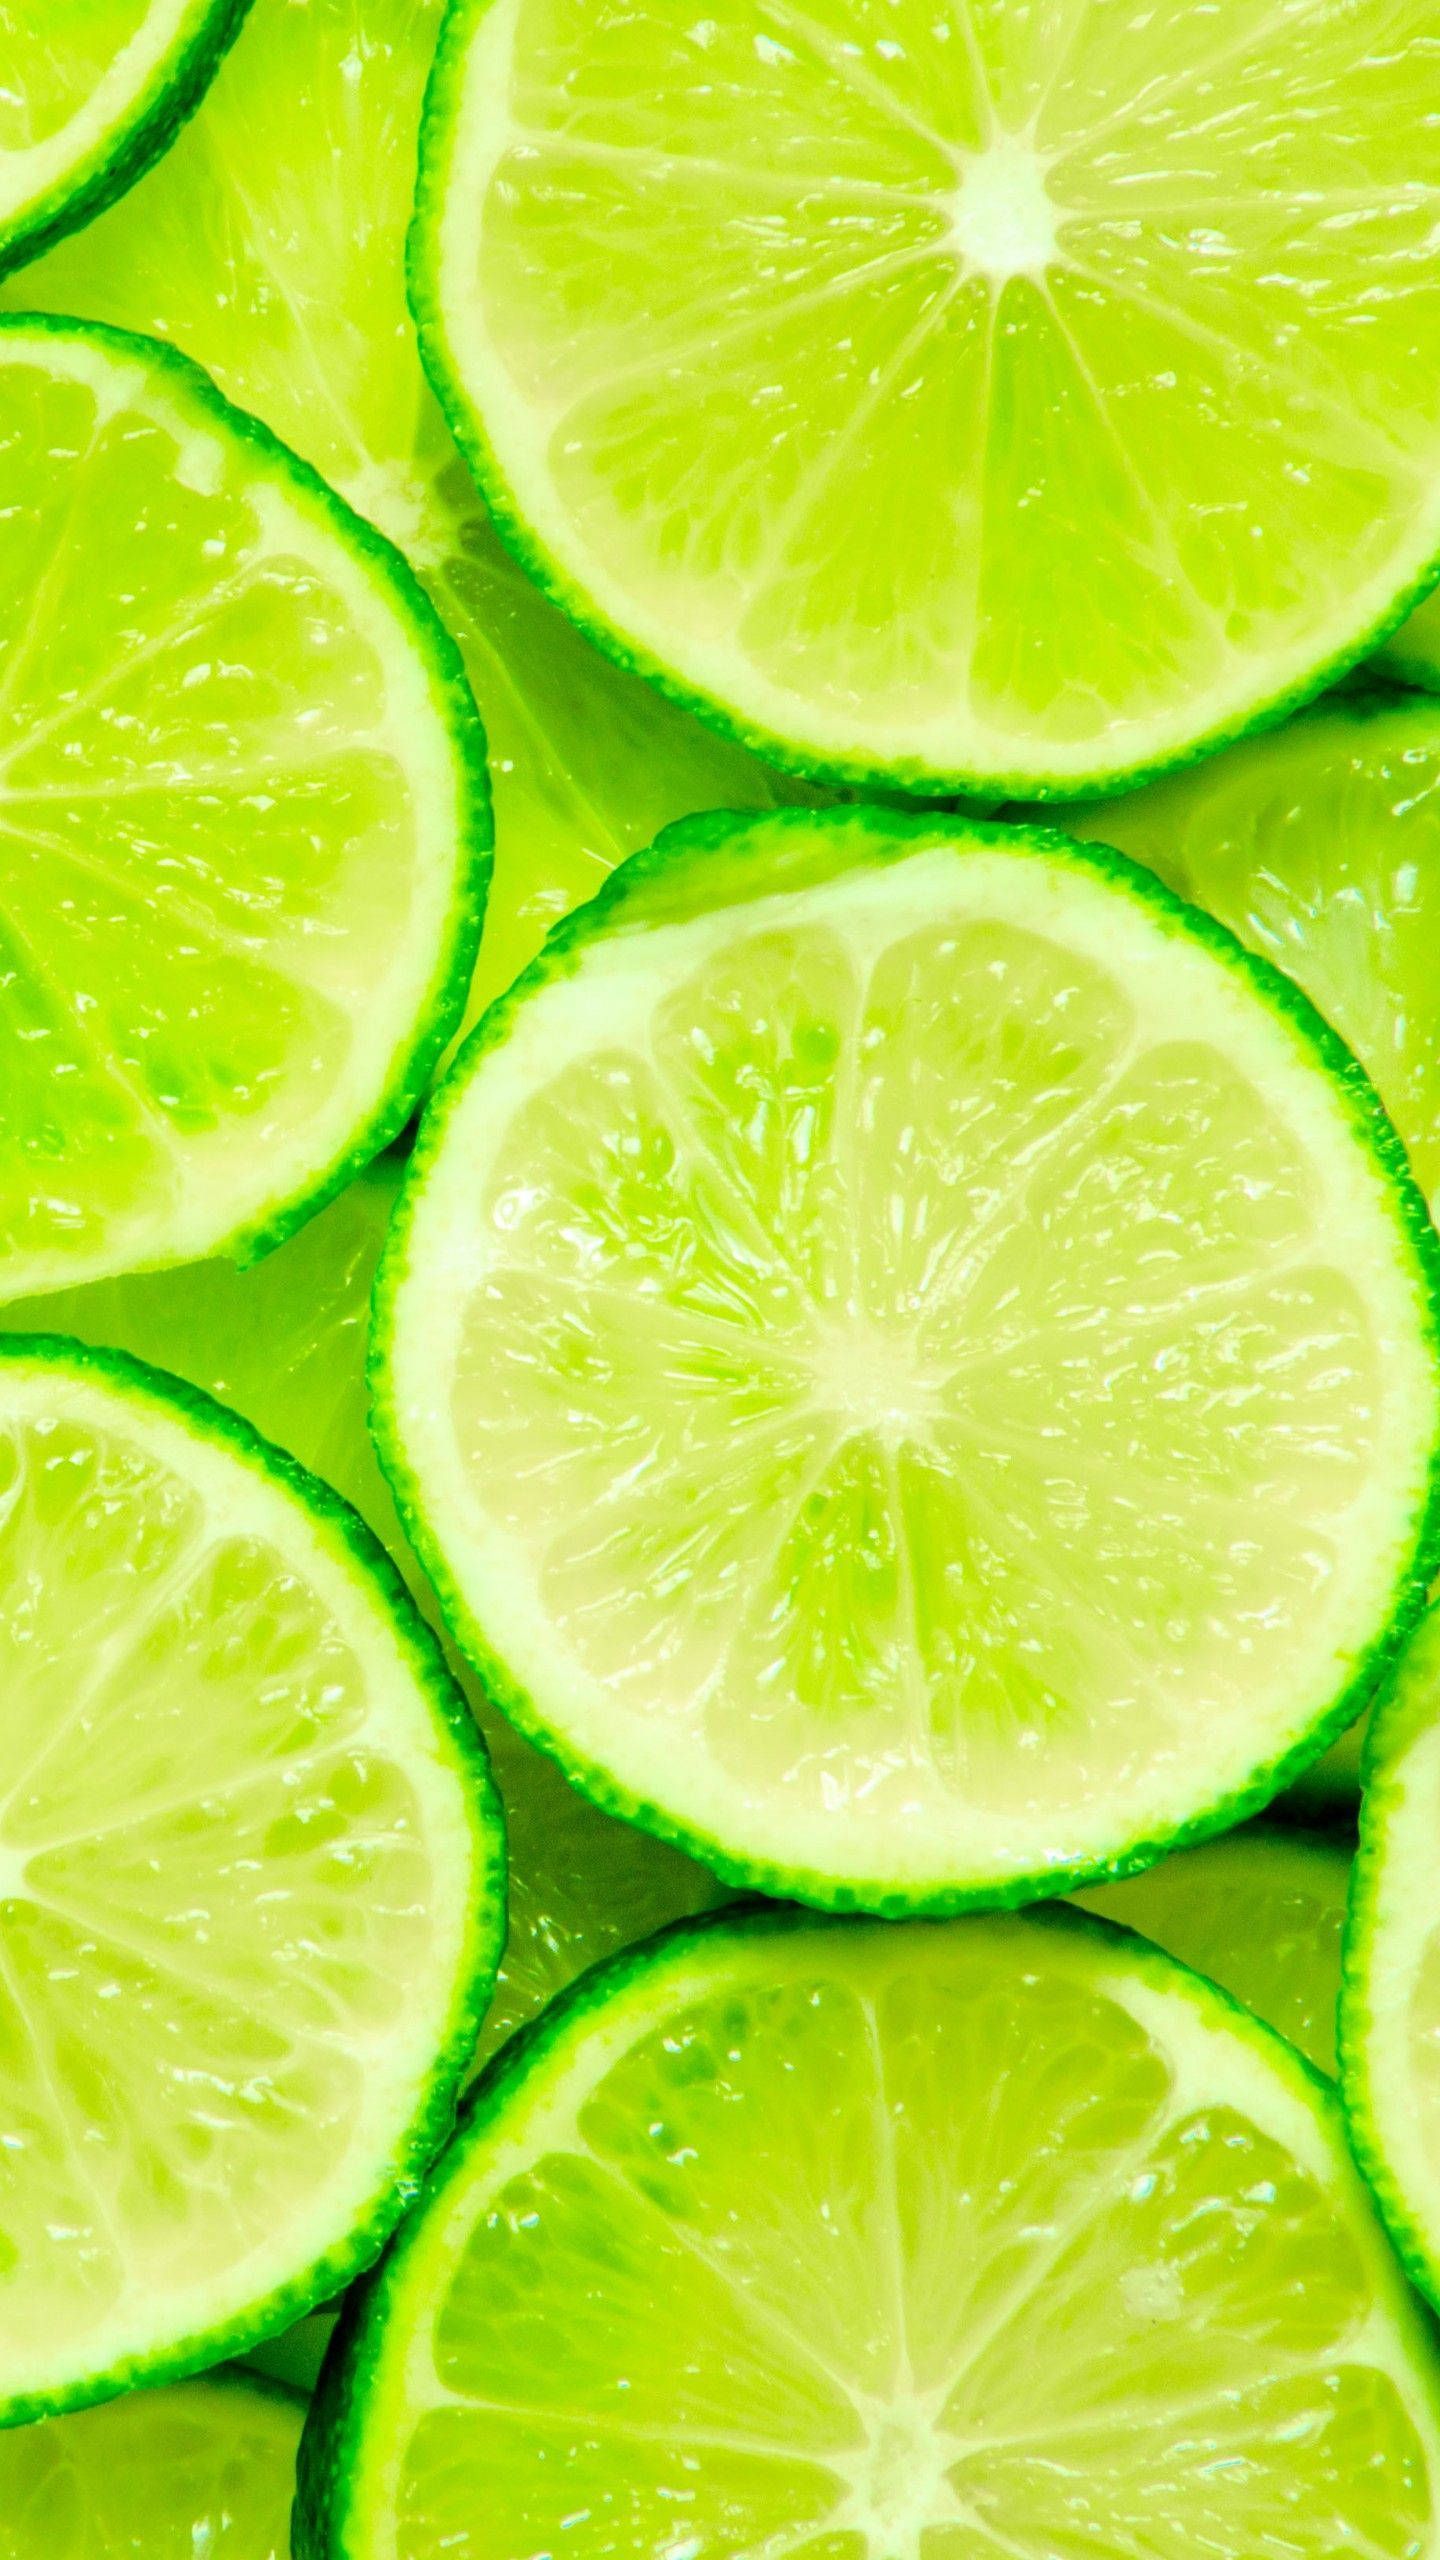 A close up of many slices limes - Lime green